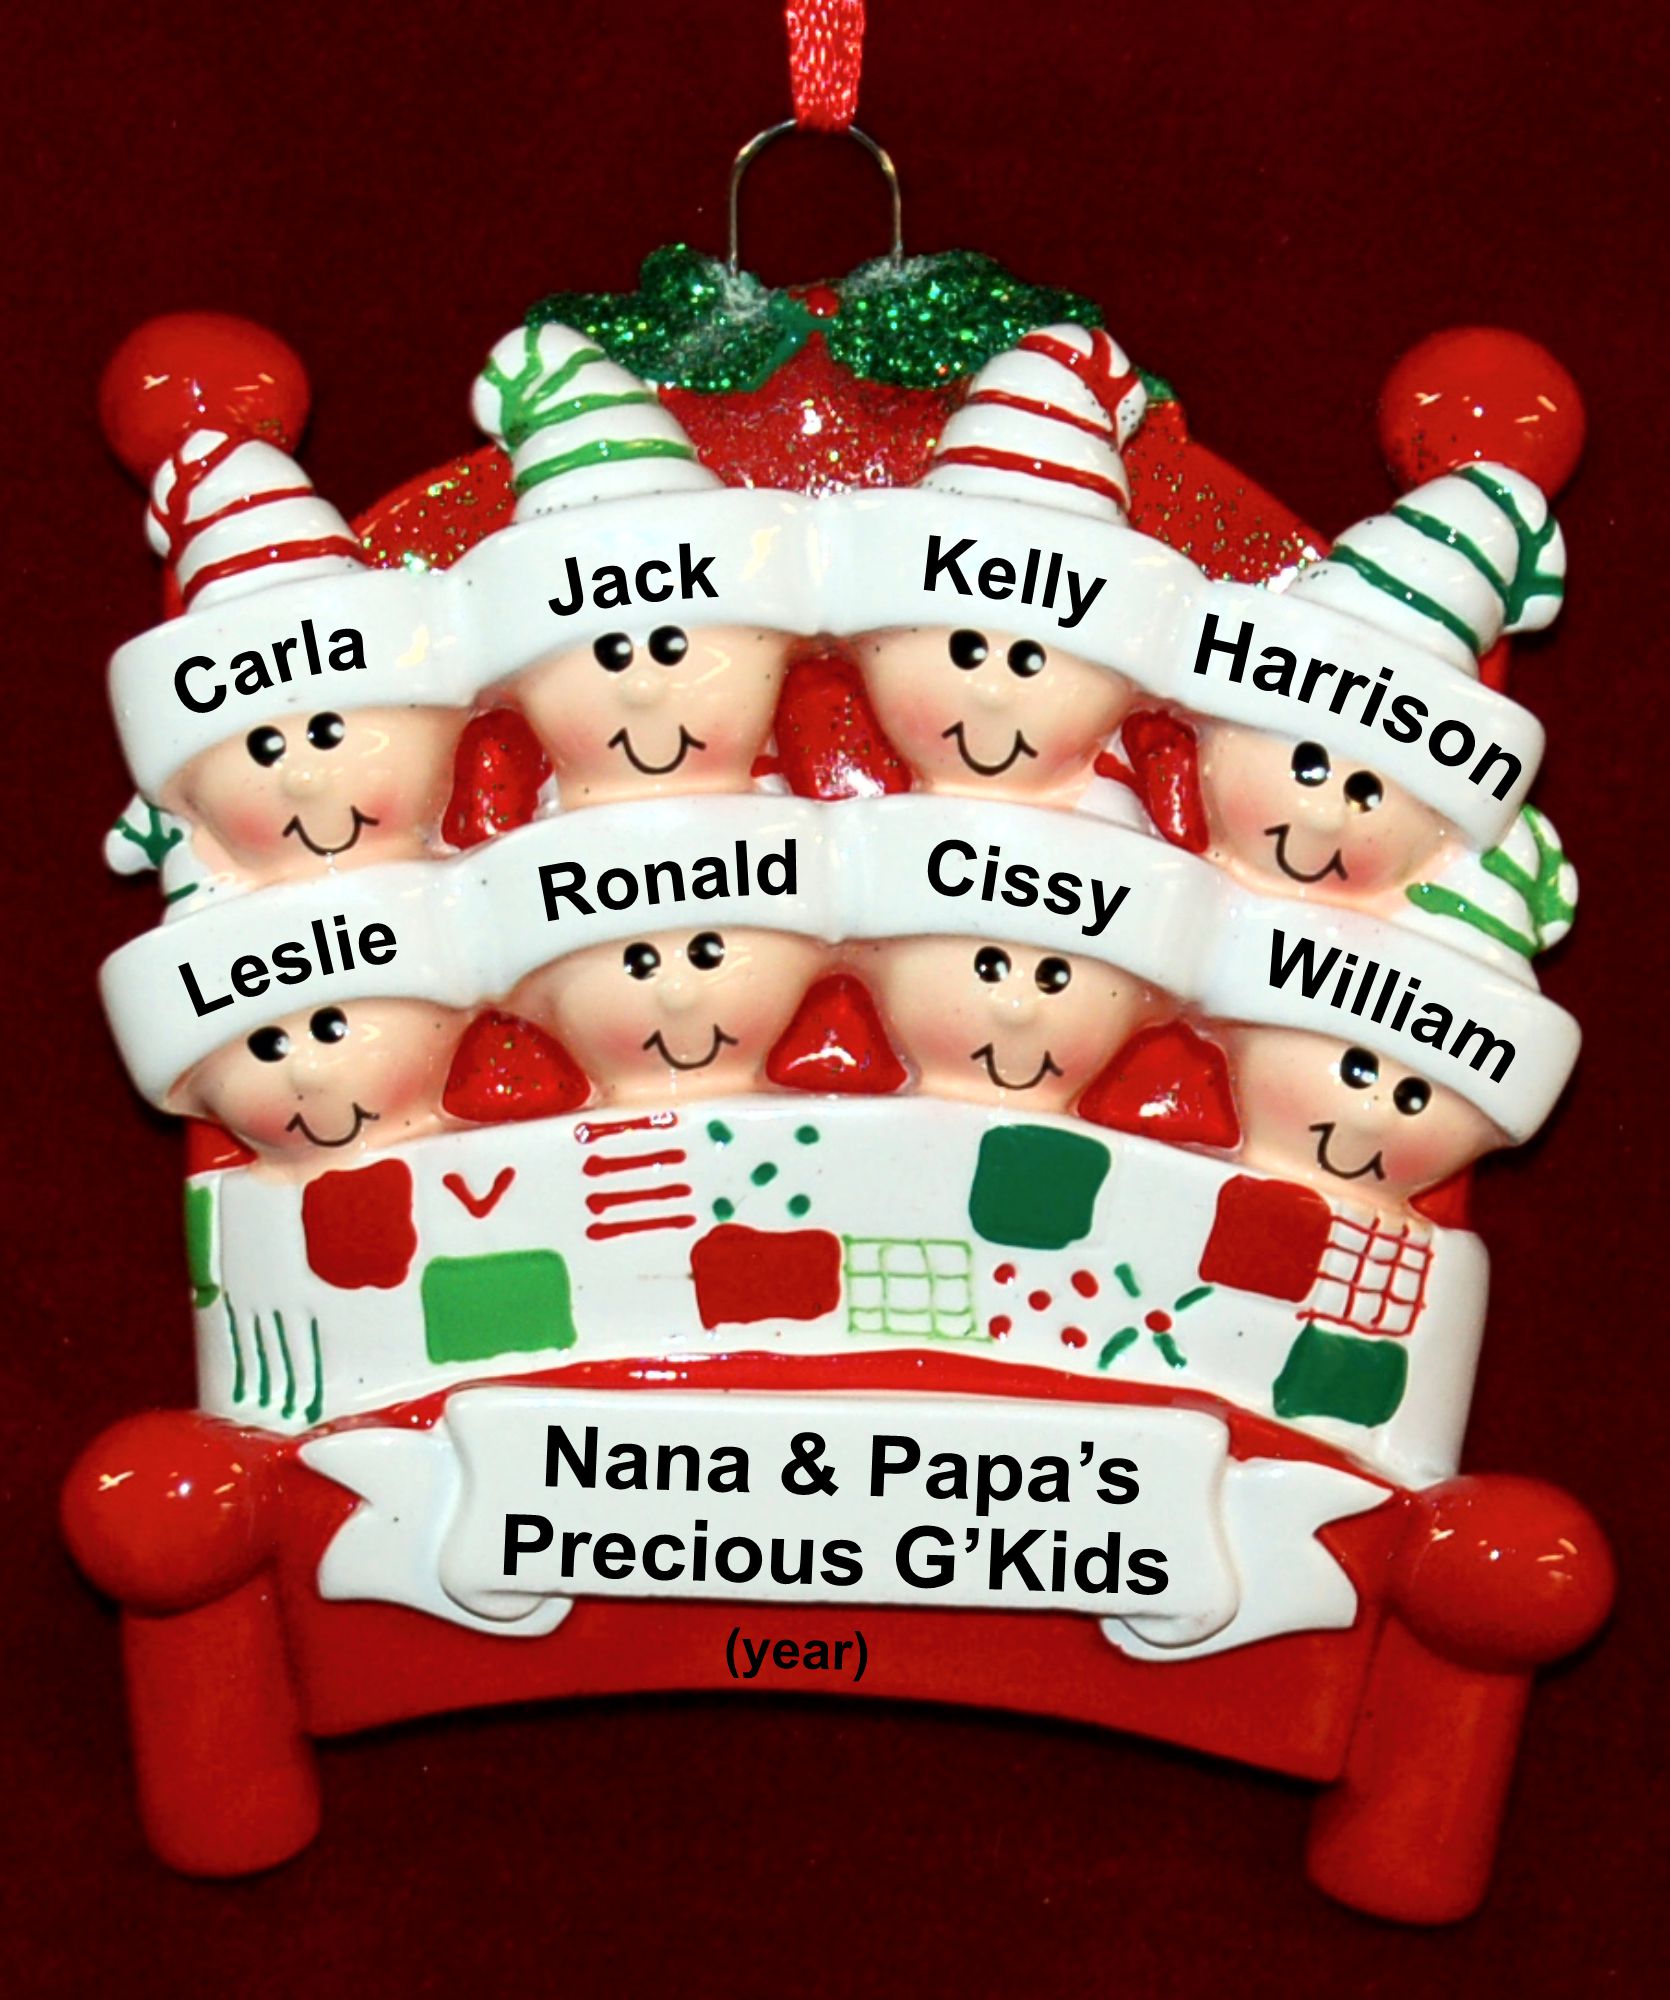 Grandparents Christmas Fun 8 Grandkids Personalized by RussellRhodes.com